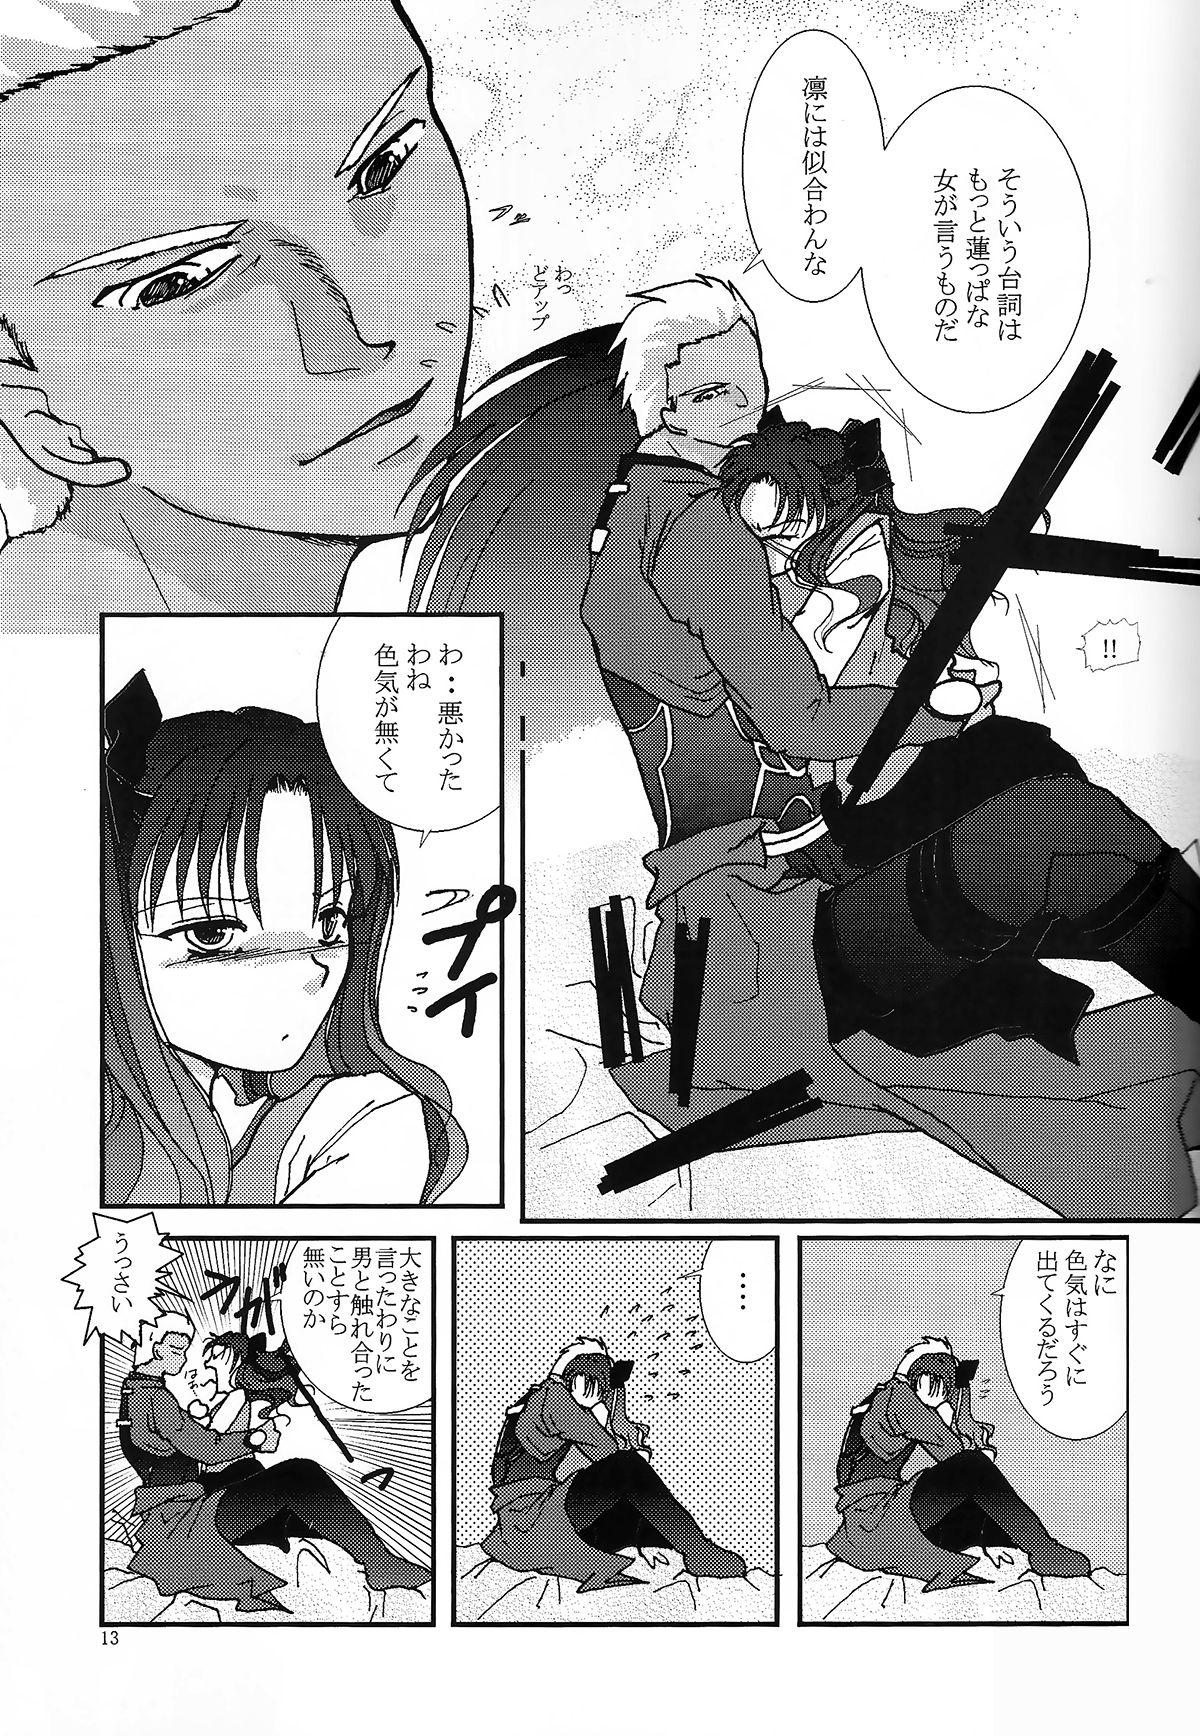 Tgirl Question-7 - Fate stay night College - Page 11